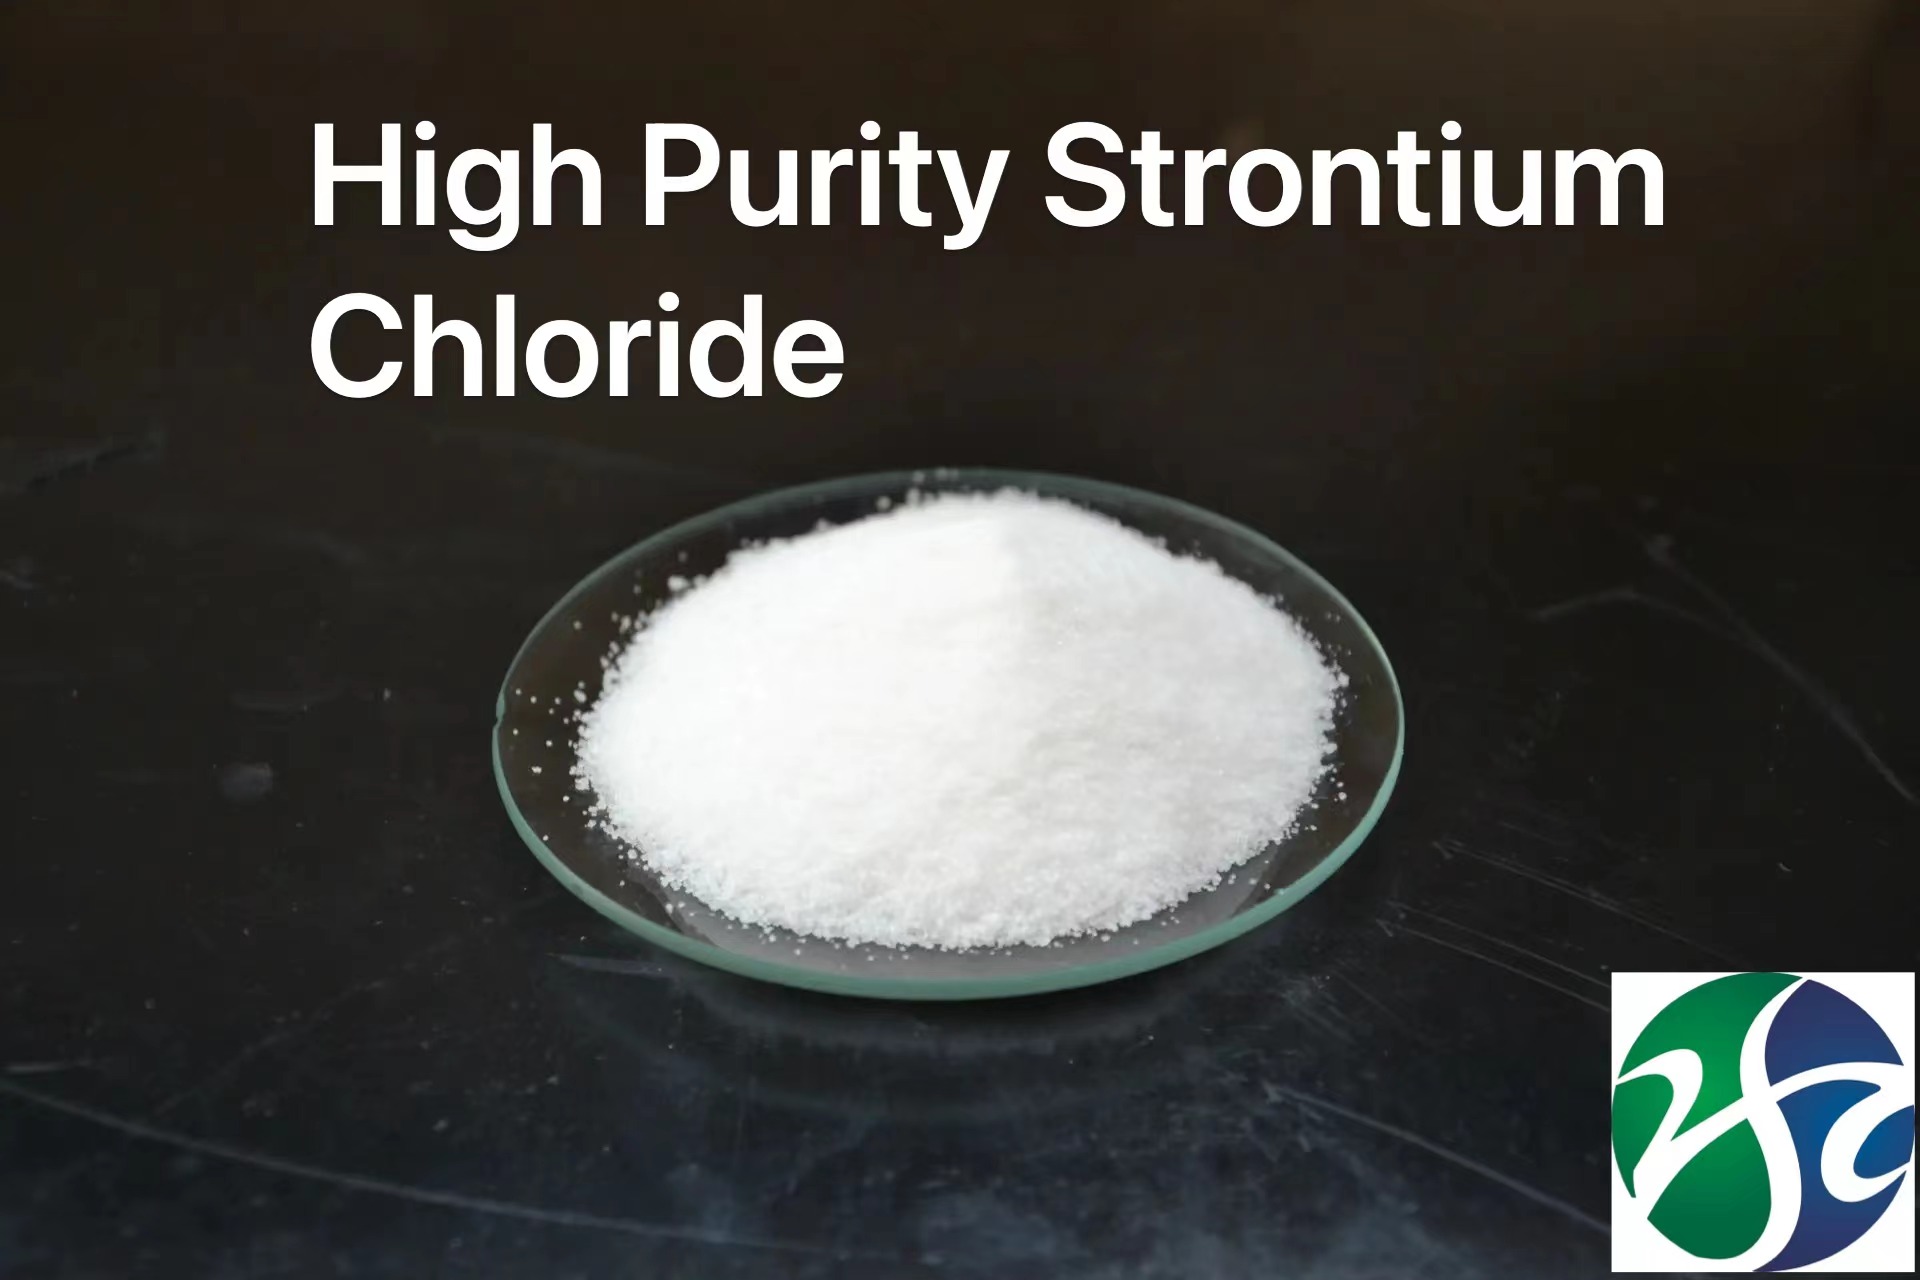 High Purity Strontium Chloride